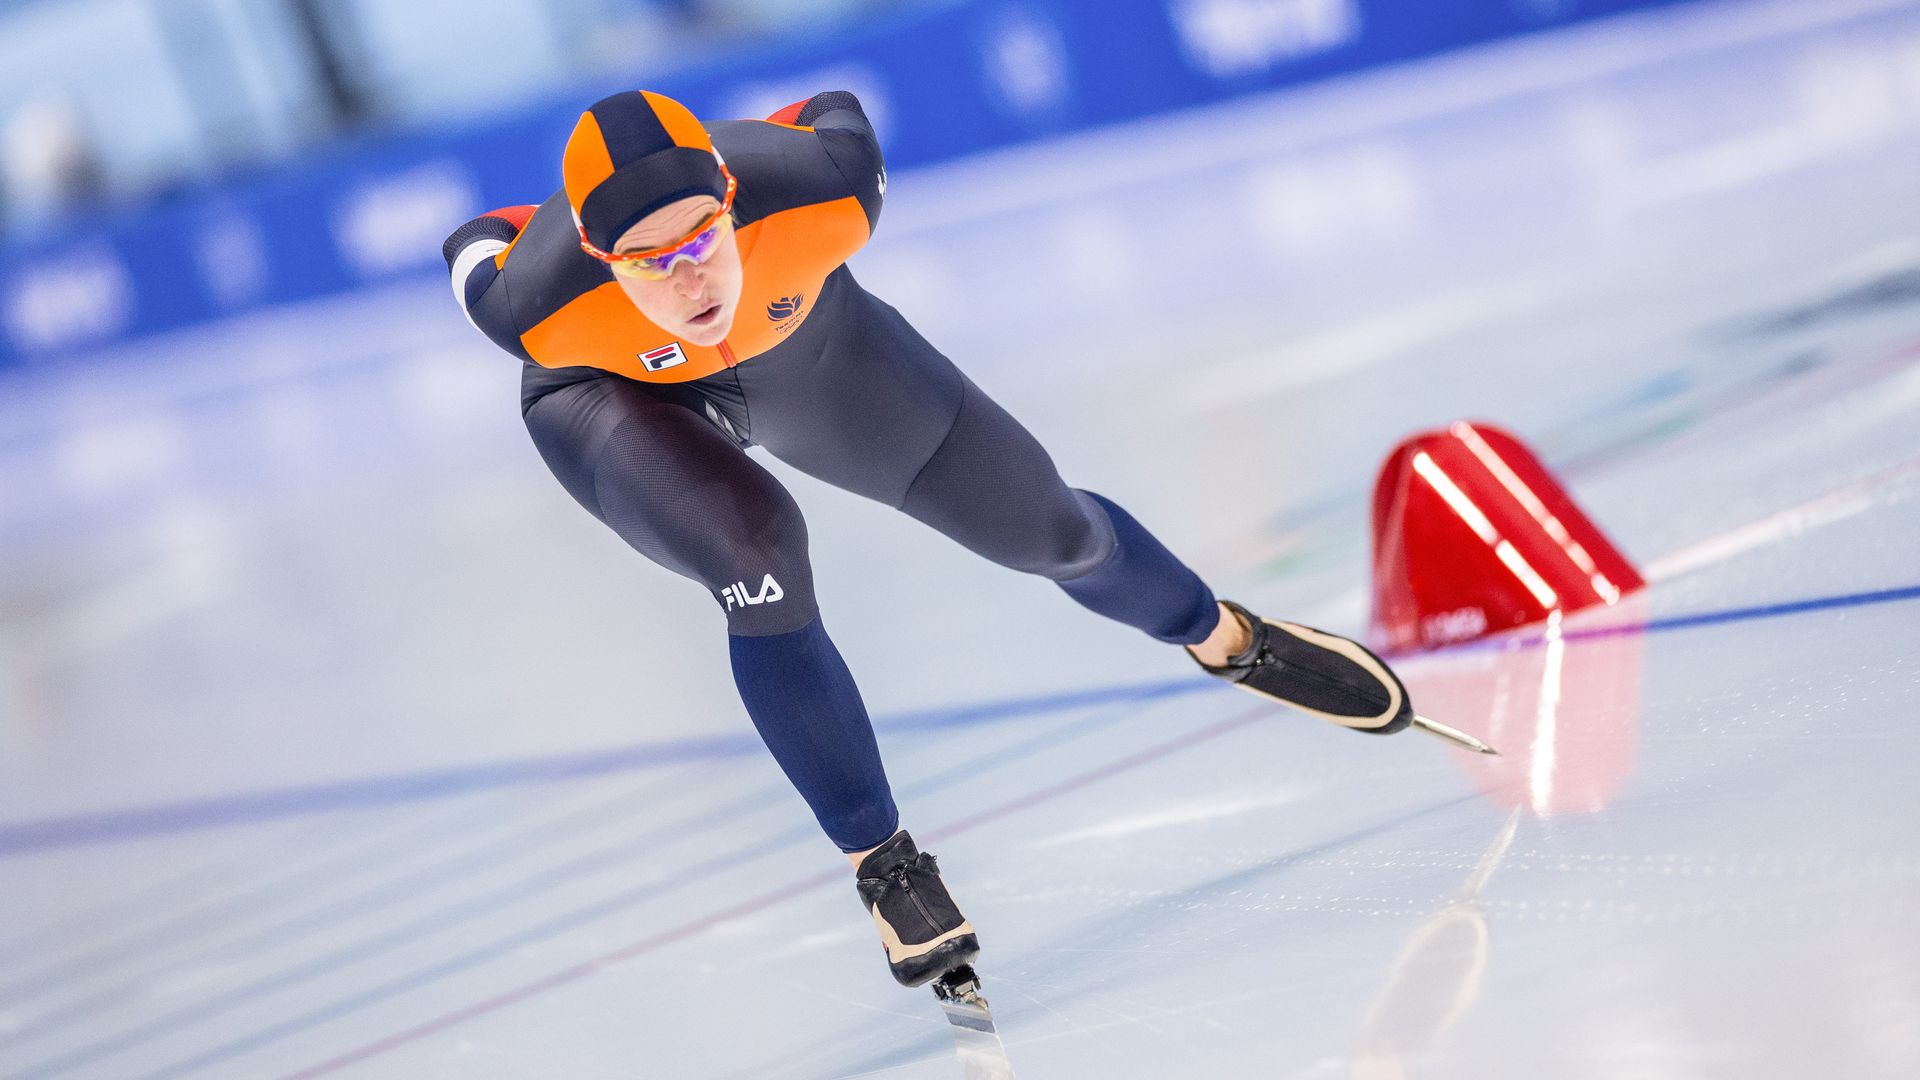 Photo of Ireen Wüst in uniform speed skating on ice during a competition